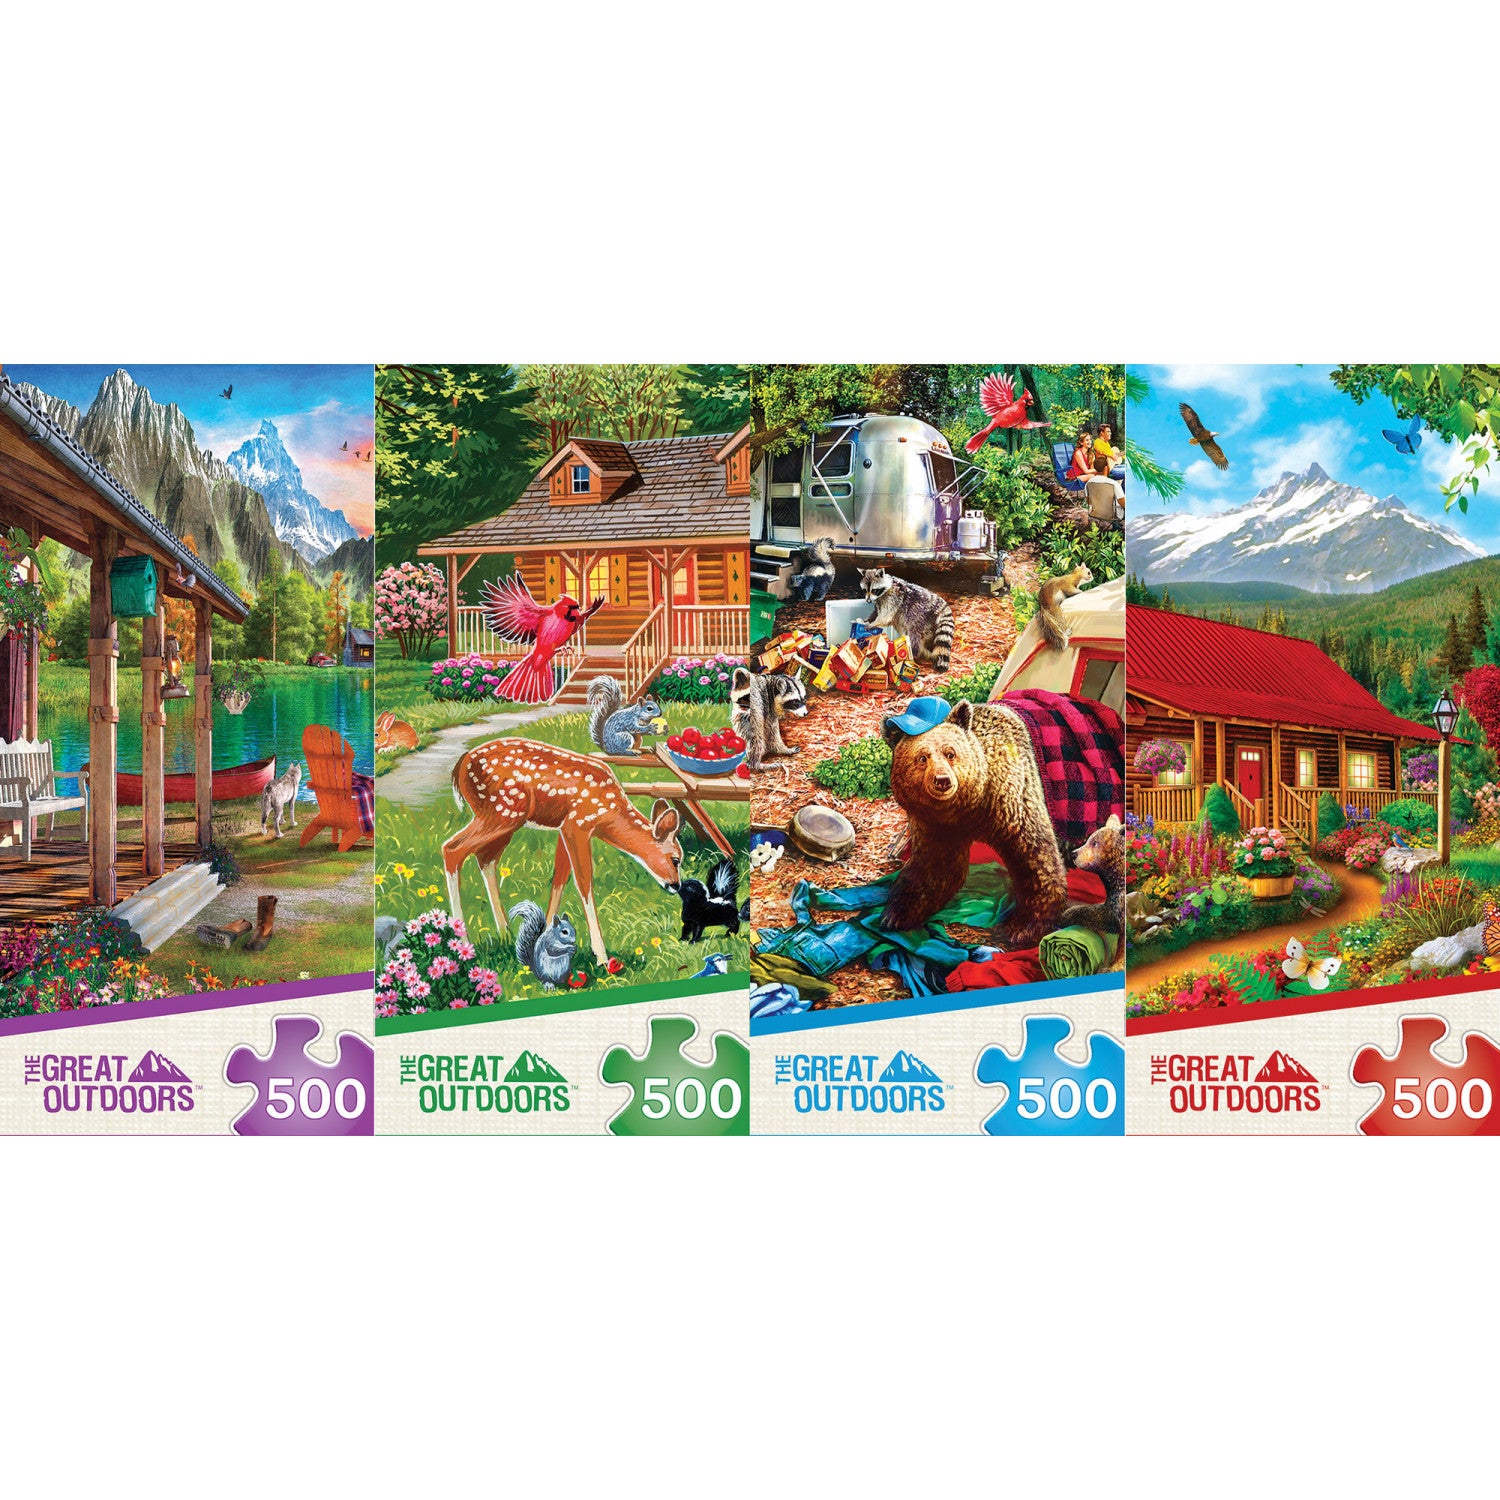  HIGOH Stitch Puzzle, 500 Pieces, 20.5'' X 15.1'' ¨C Jigsaw  Puzzle ¨C Thick, Sturdy Pieces, Challenging Family Activity, Great Gift  Idea : Toys & Games